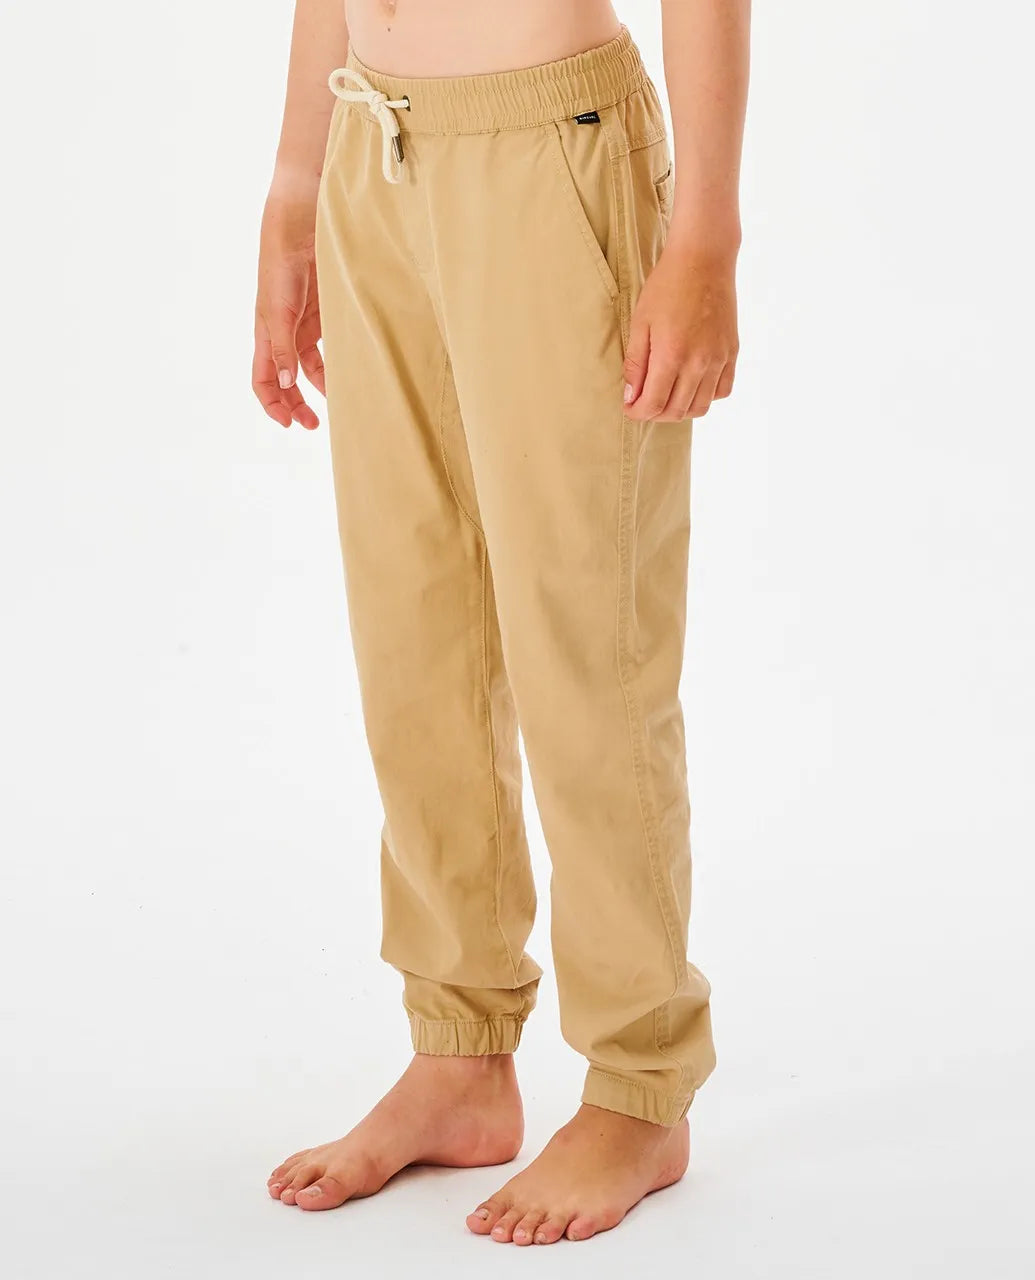 Rip Curl Epic Jogger Boys Youth